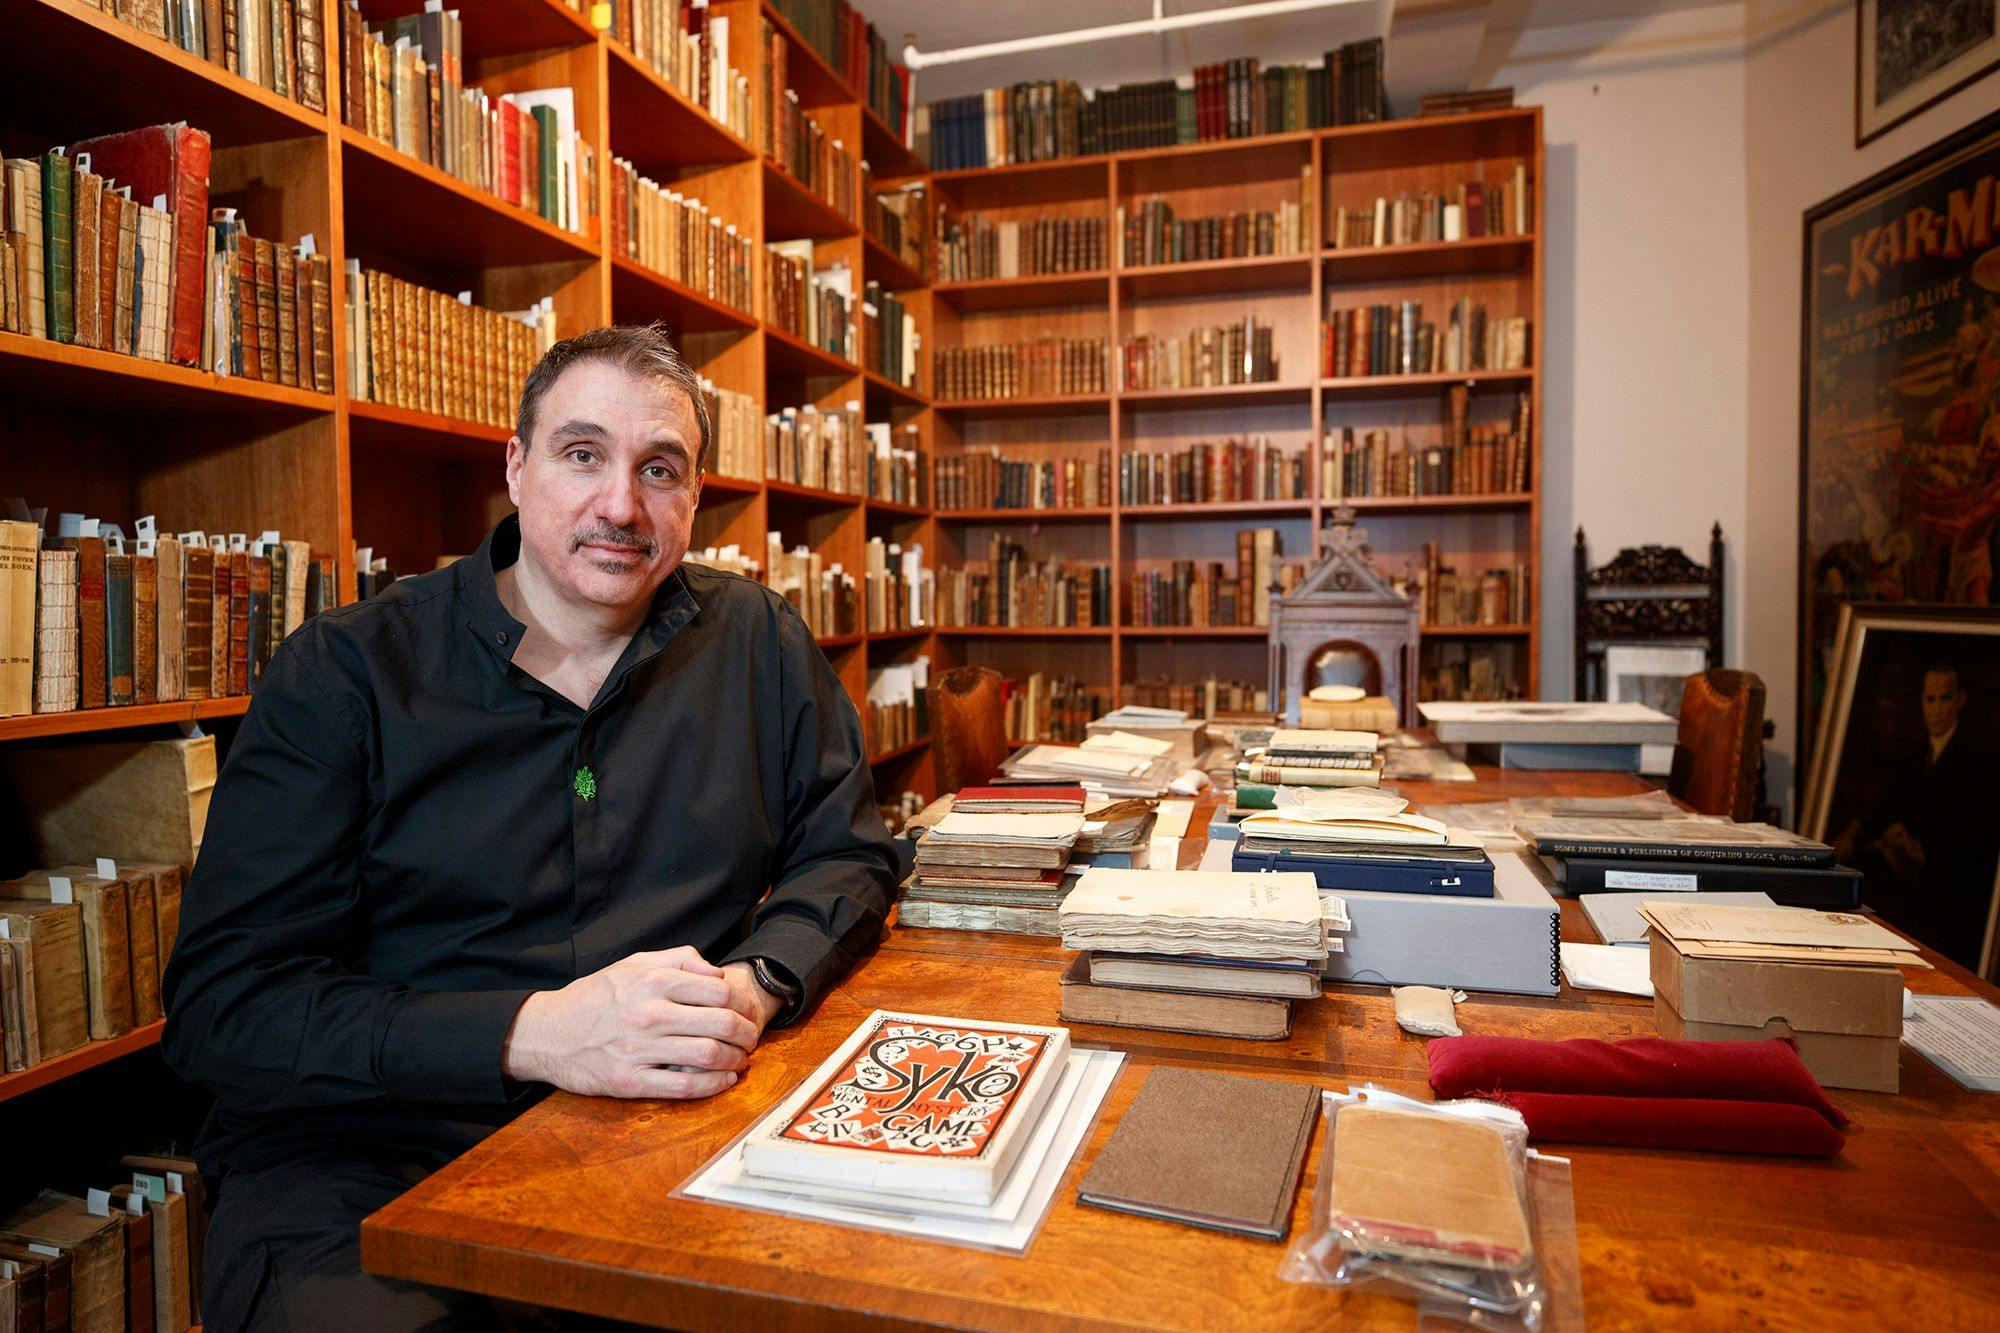 William Kalush poses in the Conjuring Arts Research Center library